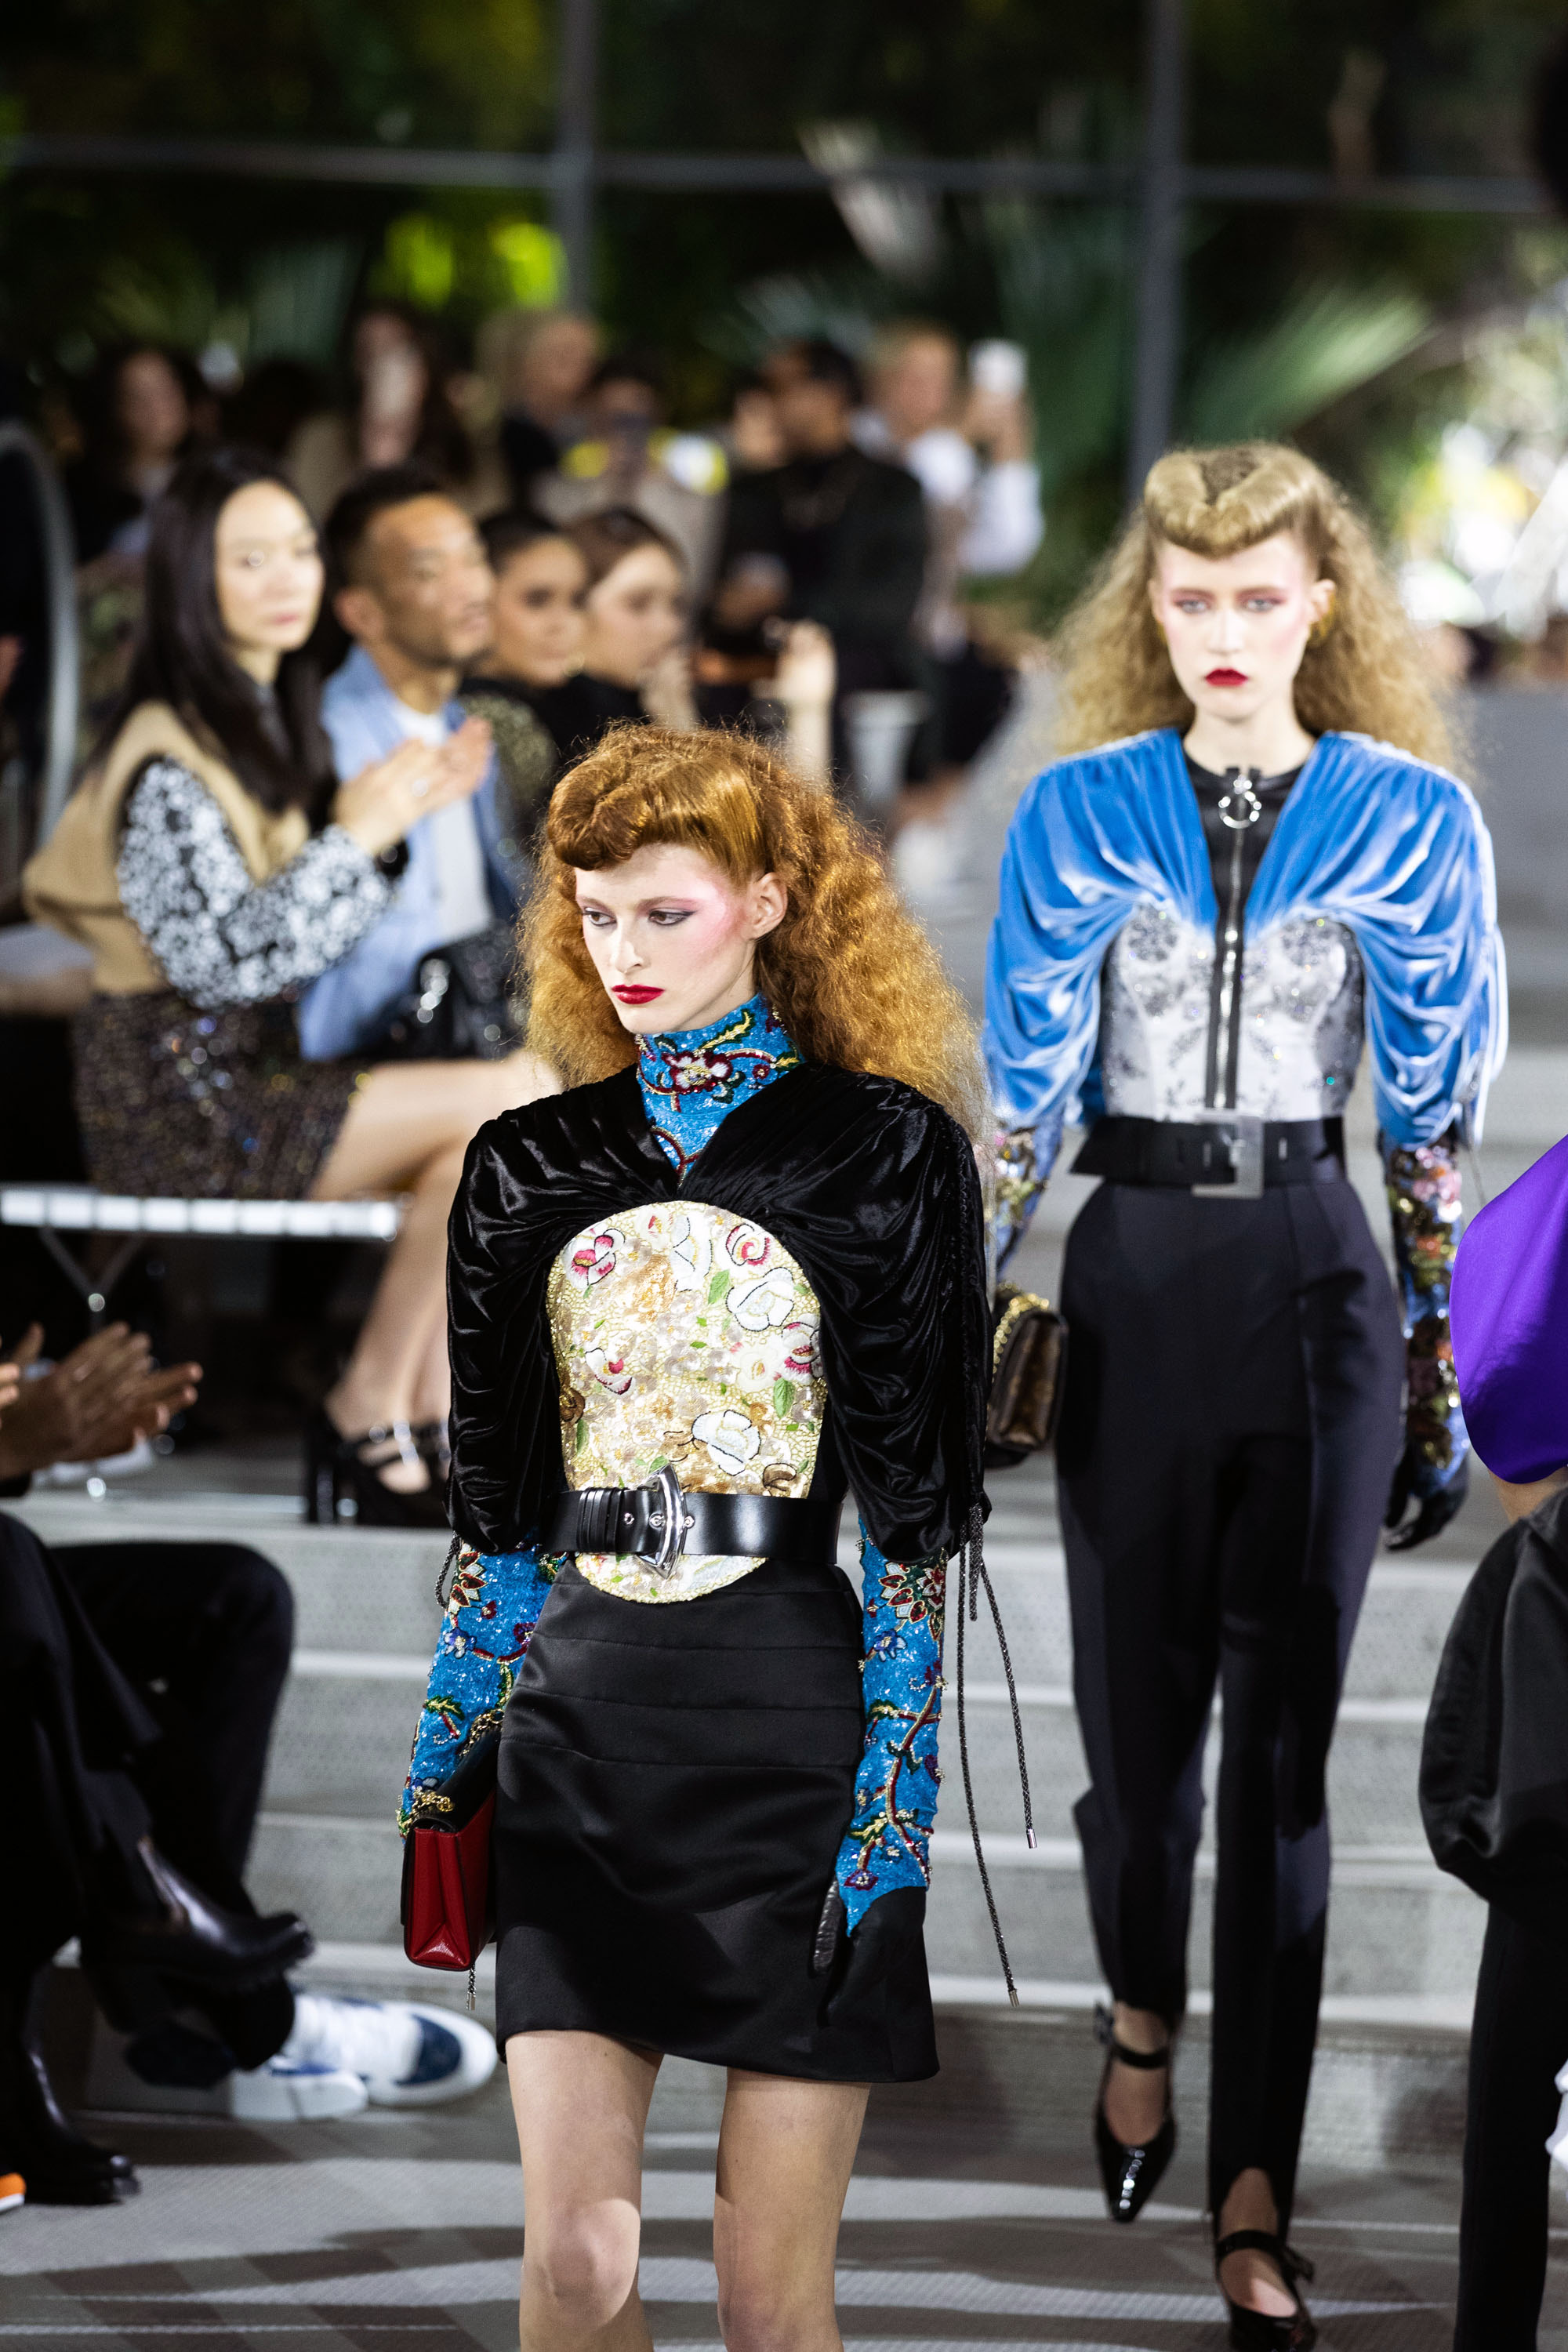 Louis Vuitton Cruise 2020 Takes Travel Back to the Airport - V